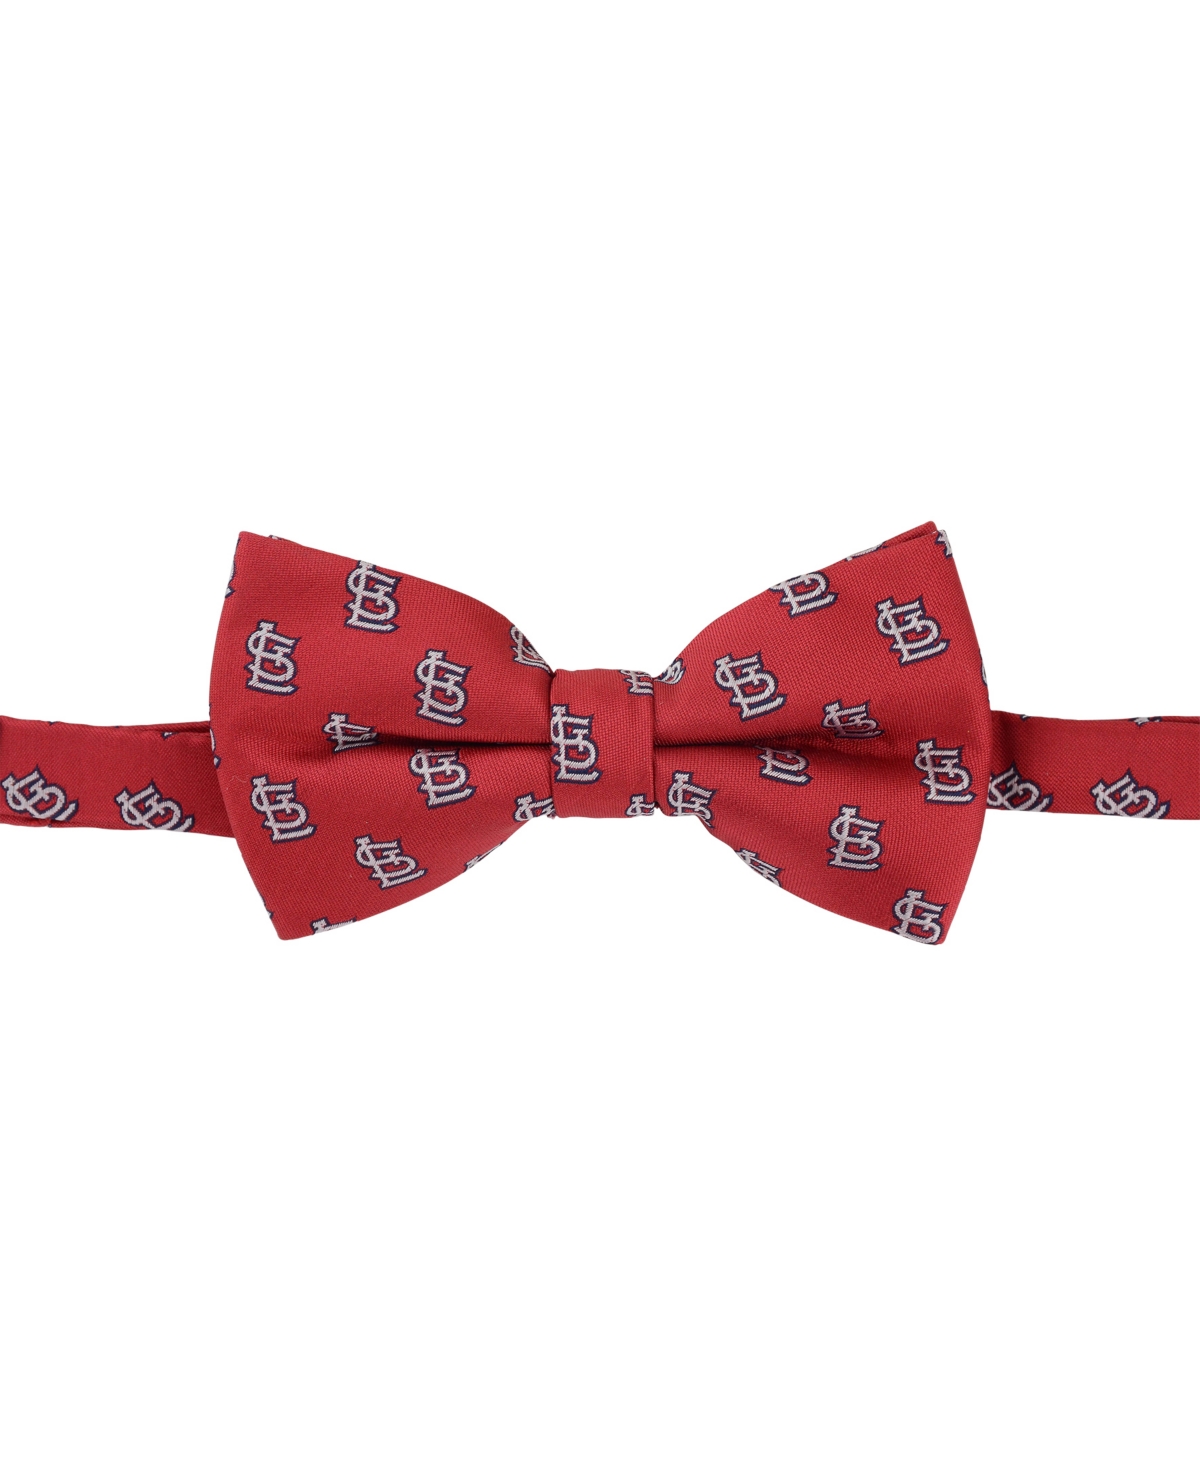 St. Louis Cardinals Bow Tie - Red